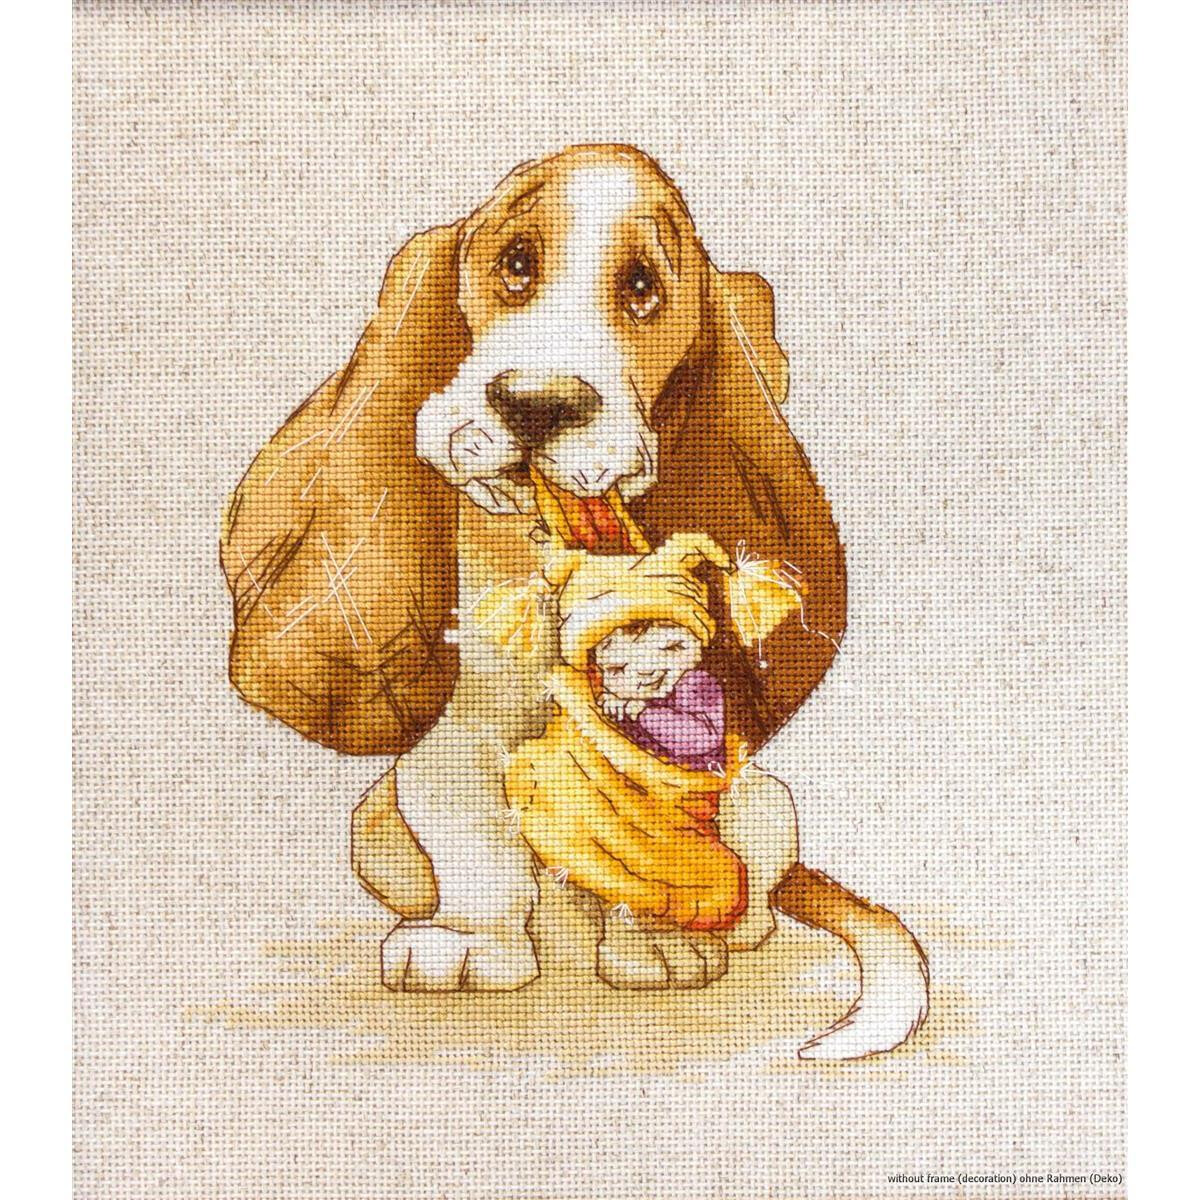 An illustration of a basset hound with droopy eyes...